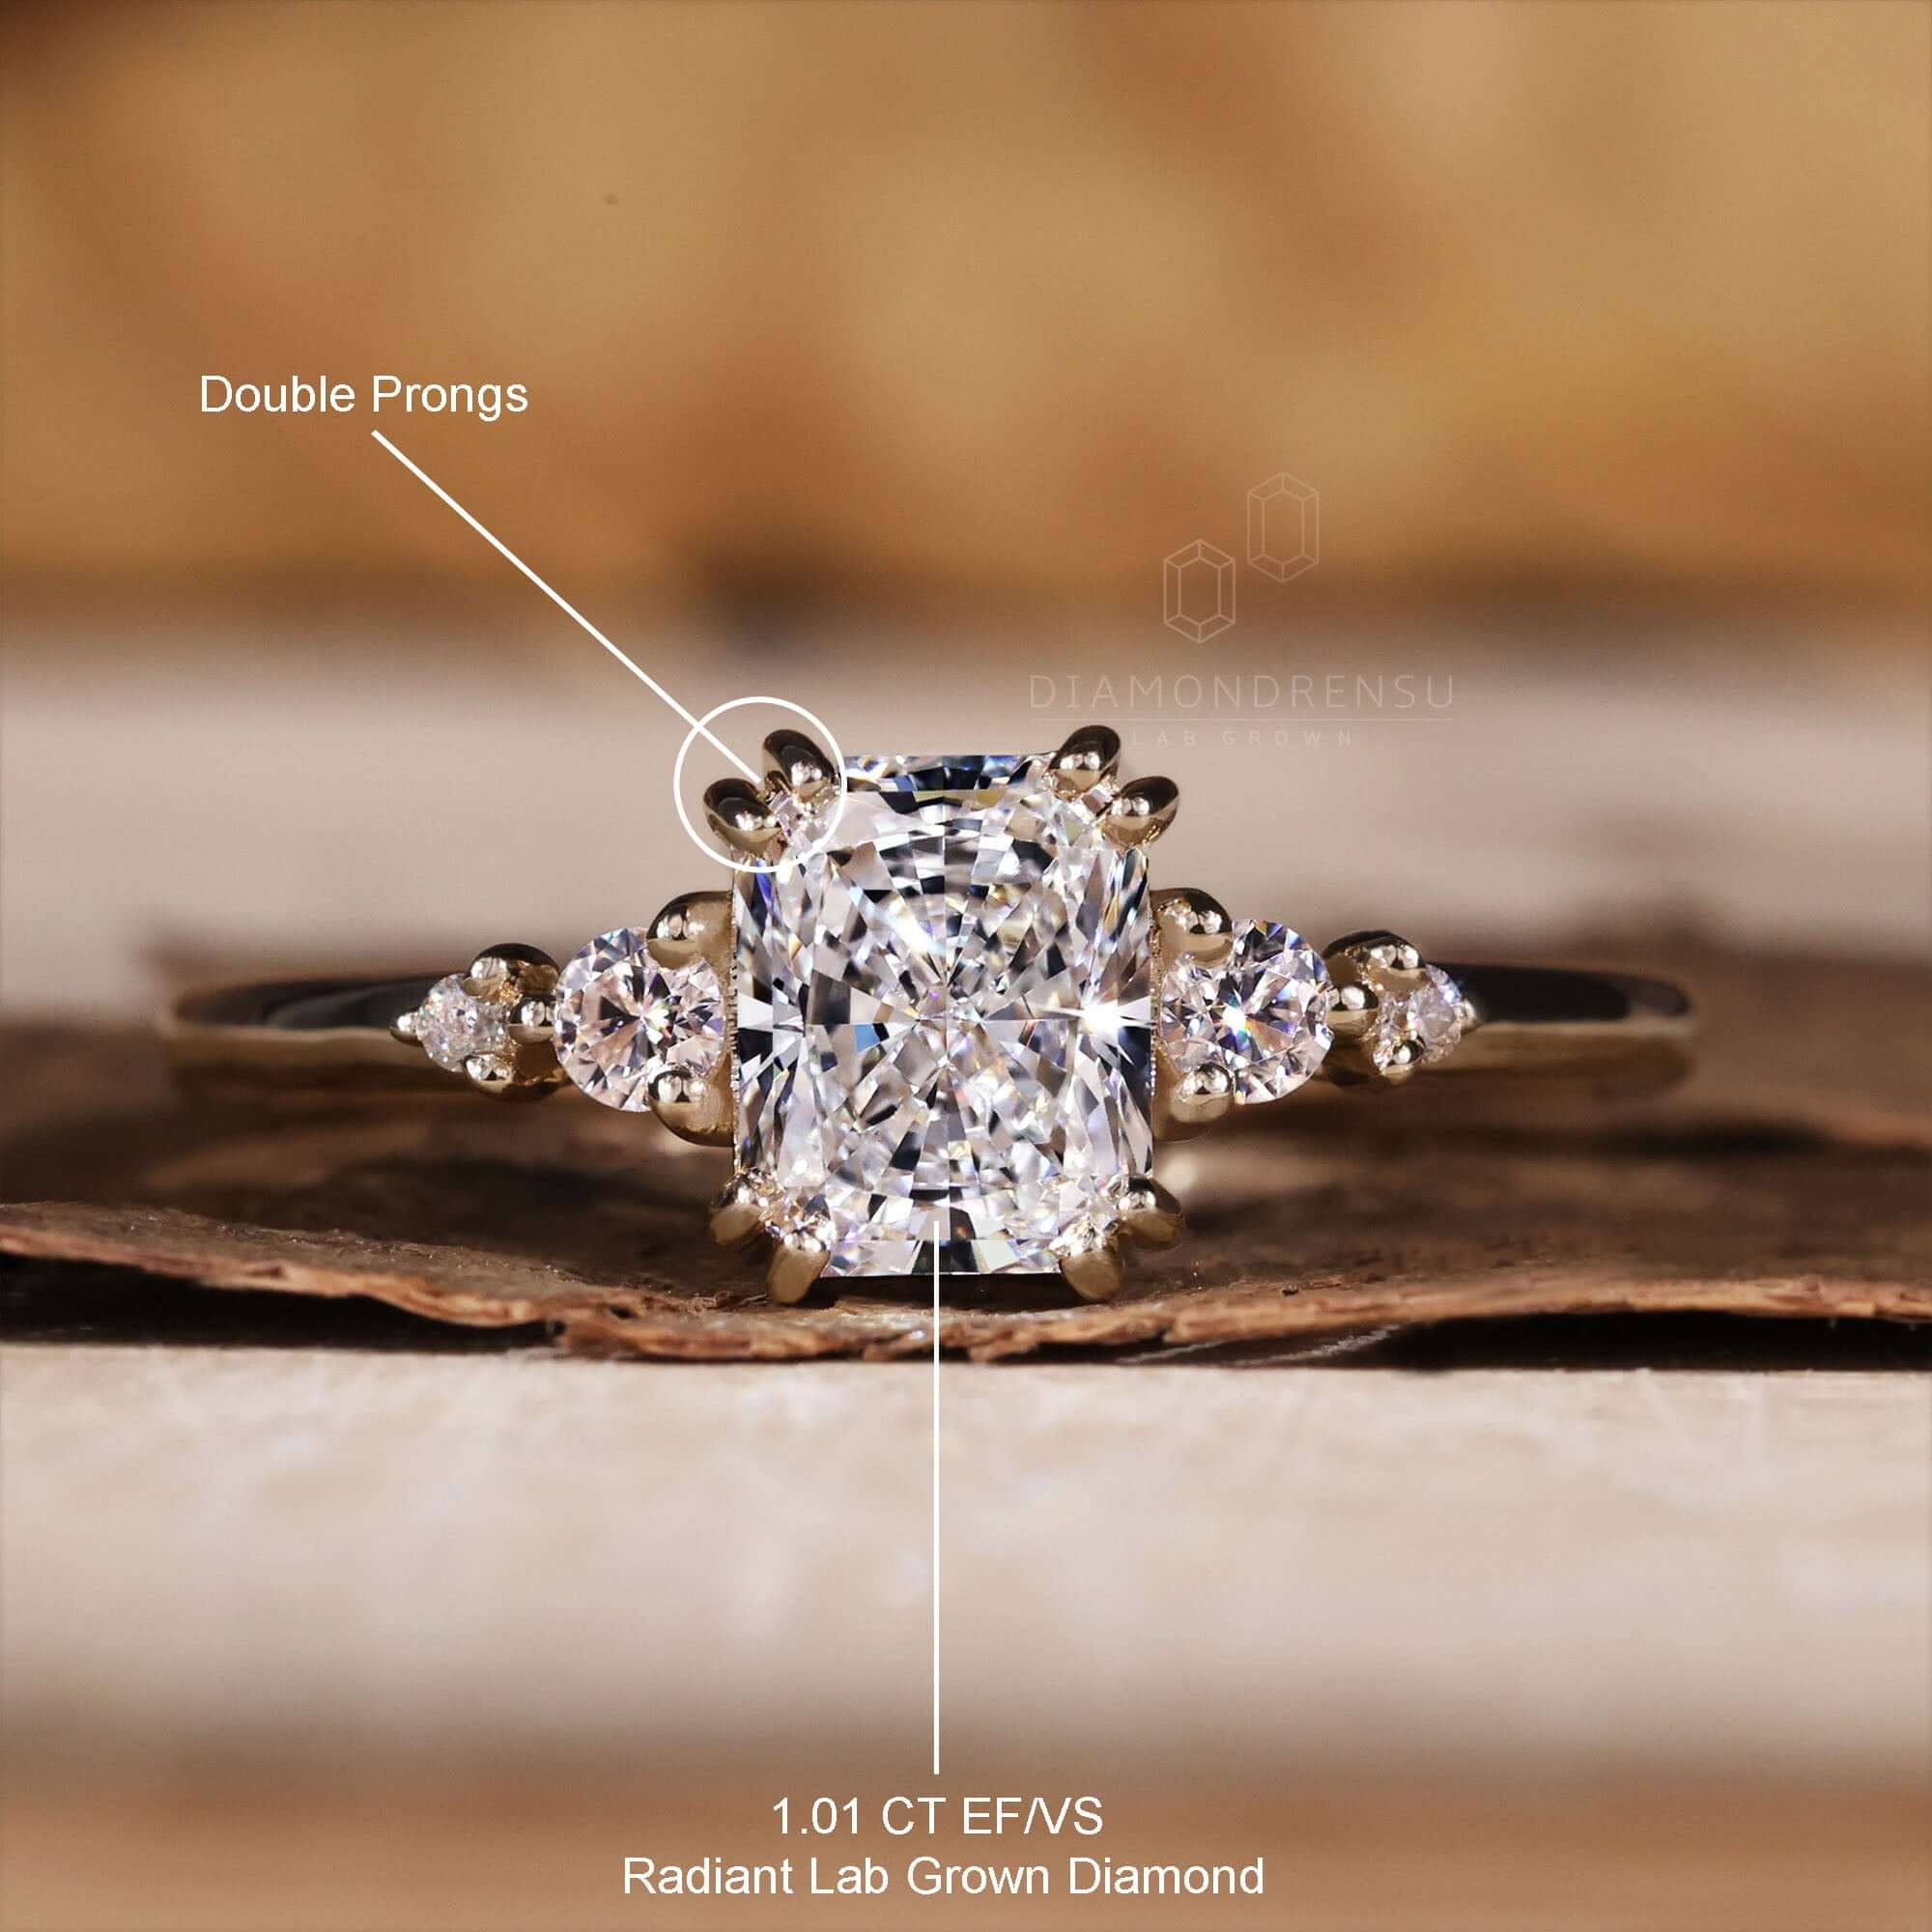 How Much Should You Spend on an Engagement Ring